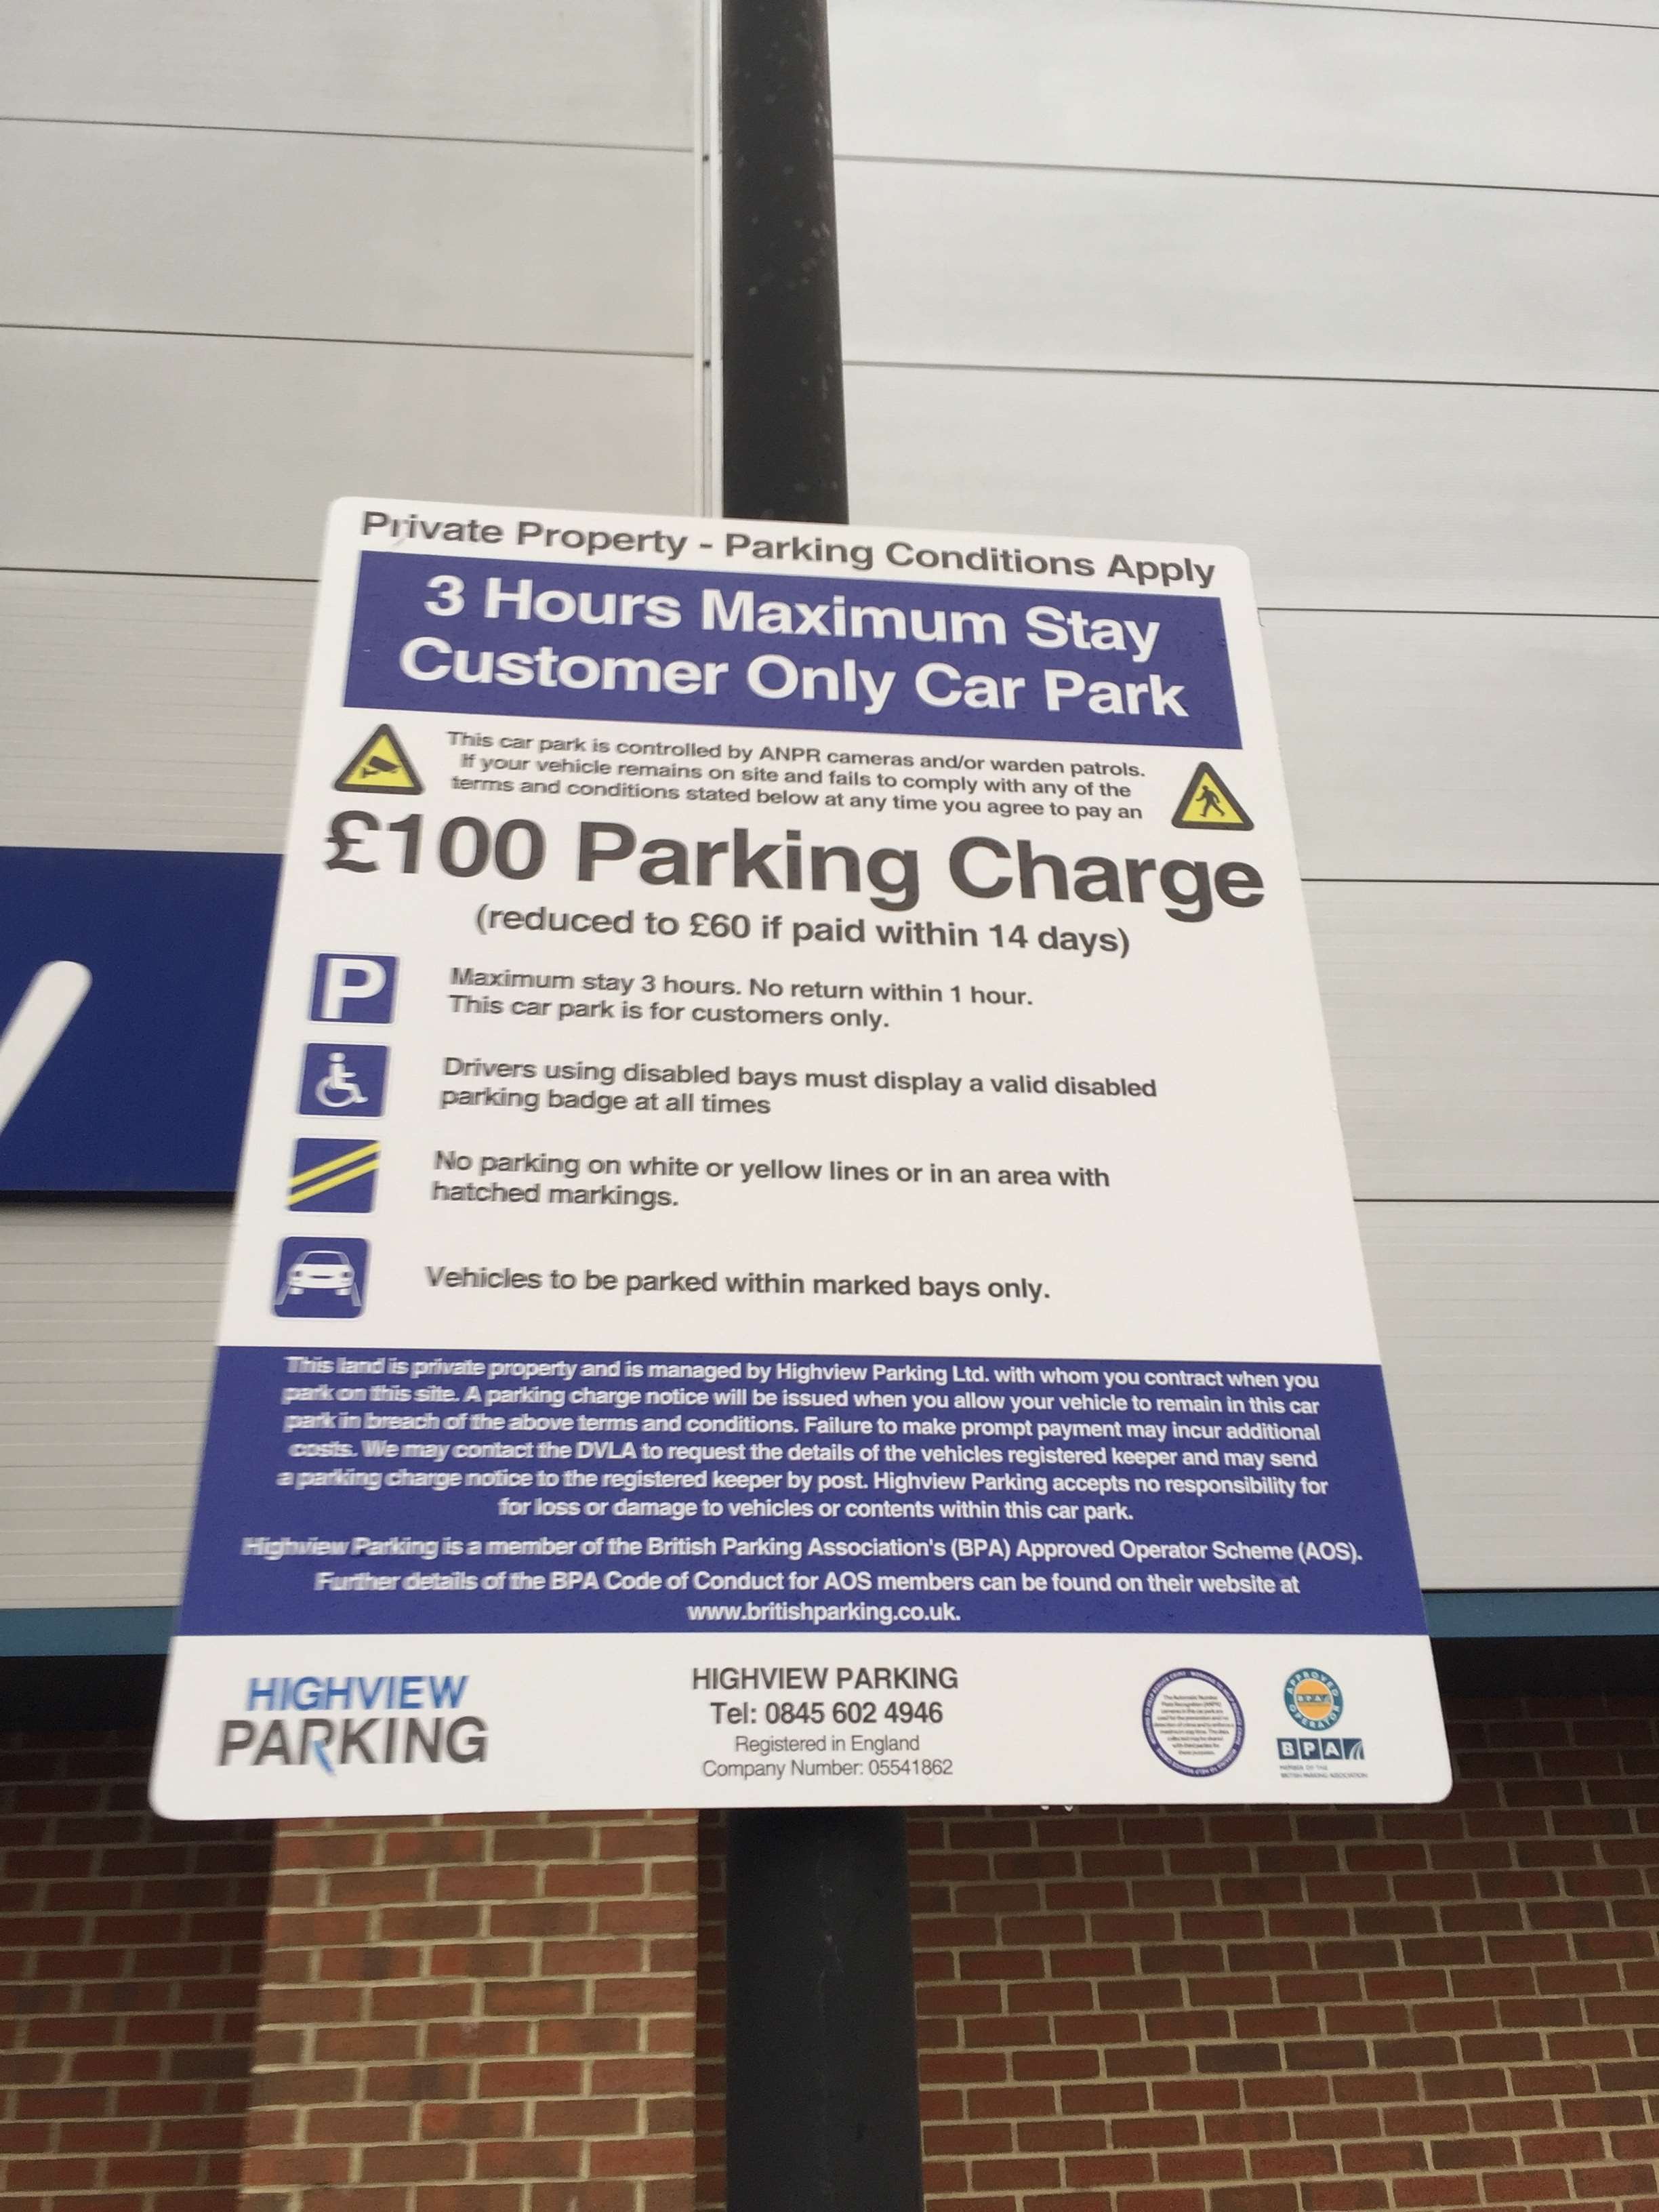 The new signs indicating the parking charge and conditions